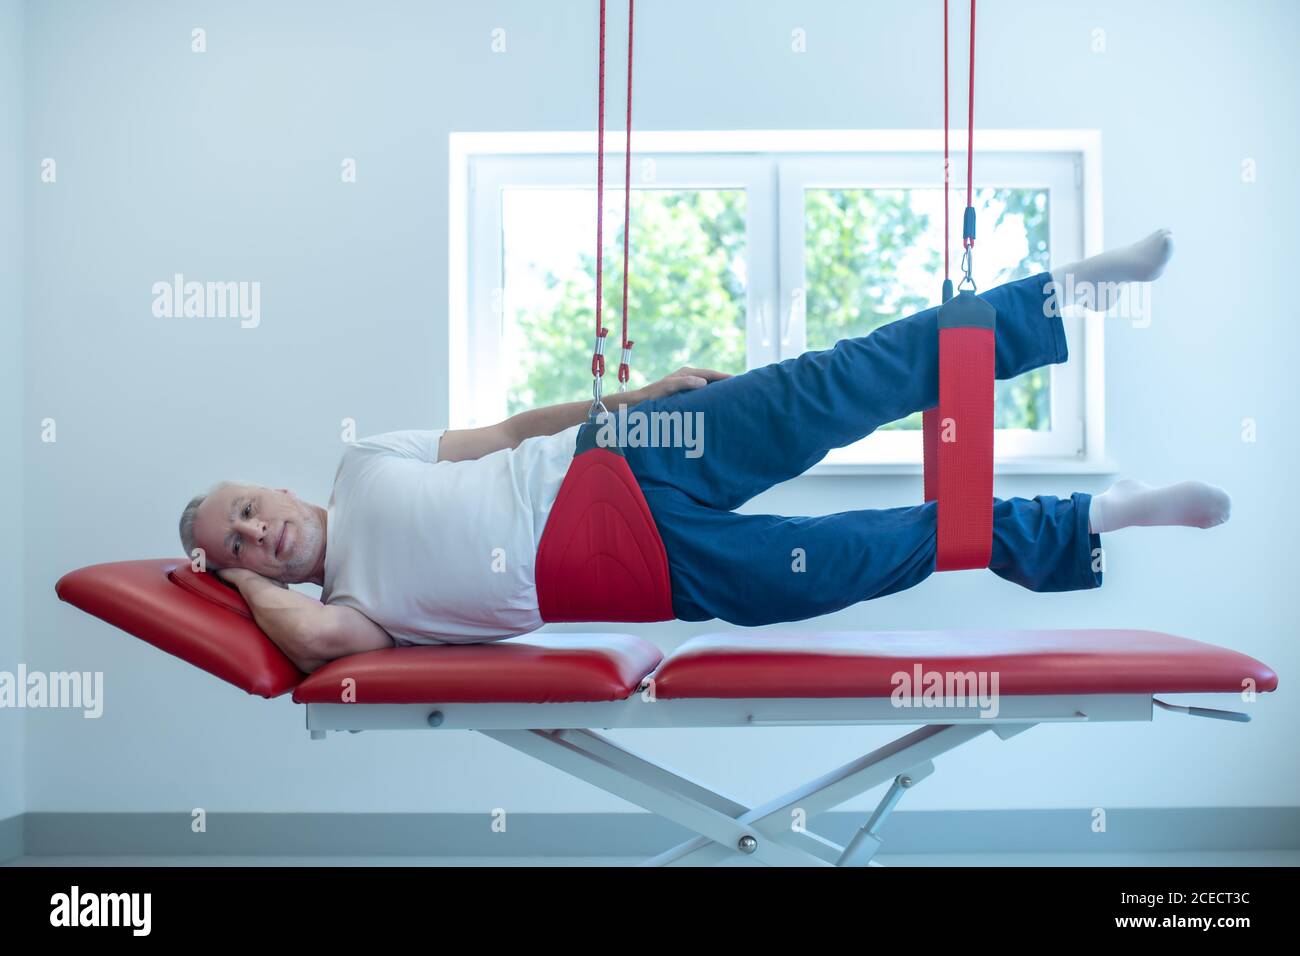 Man on his side on couch in rehabilitation center Stock Photo